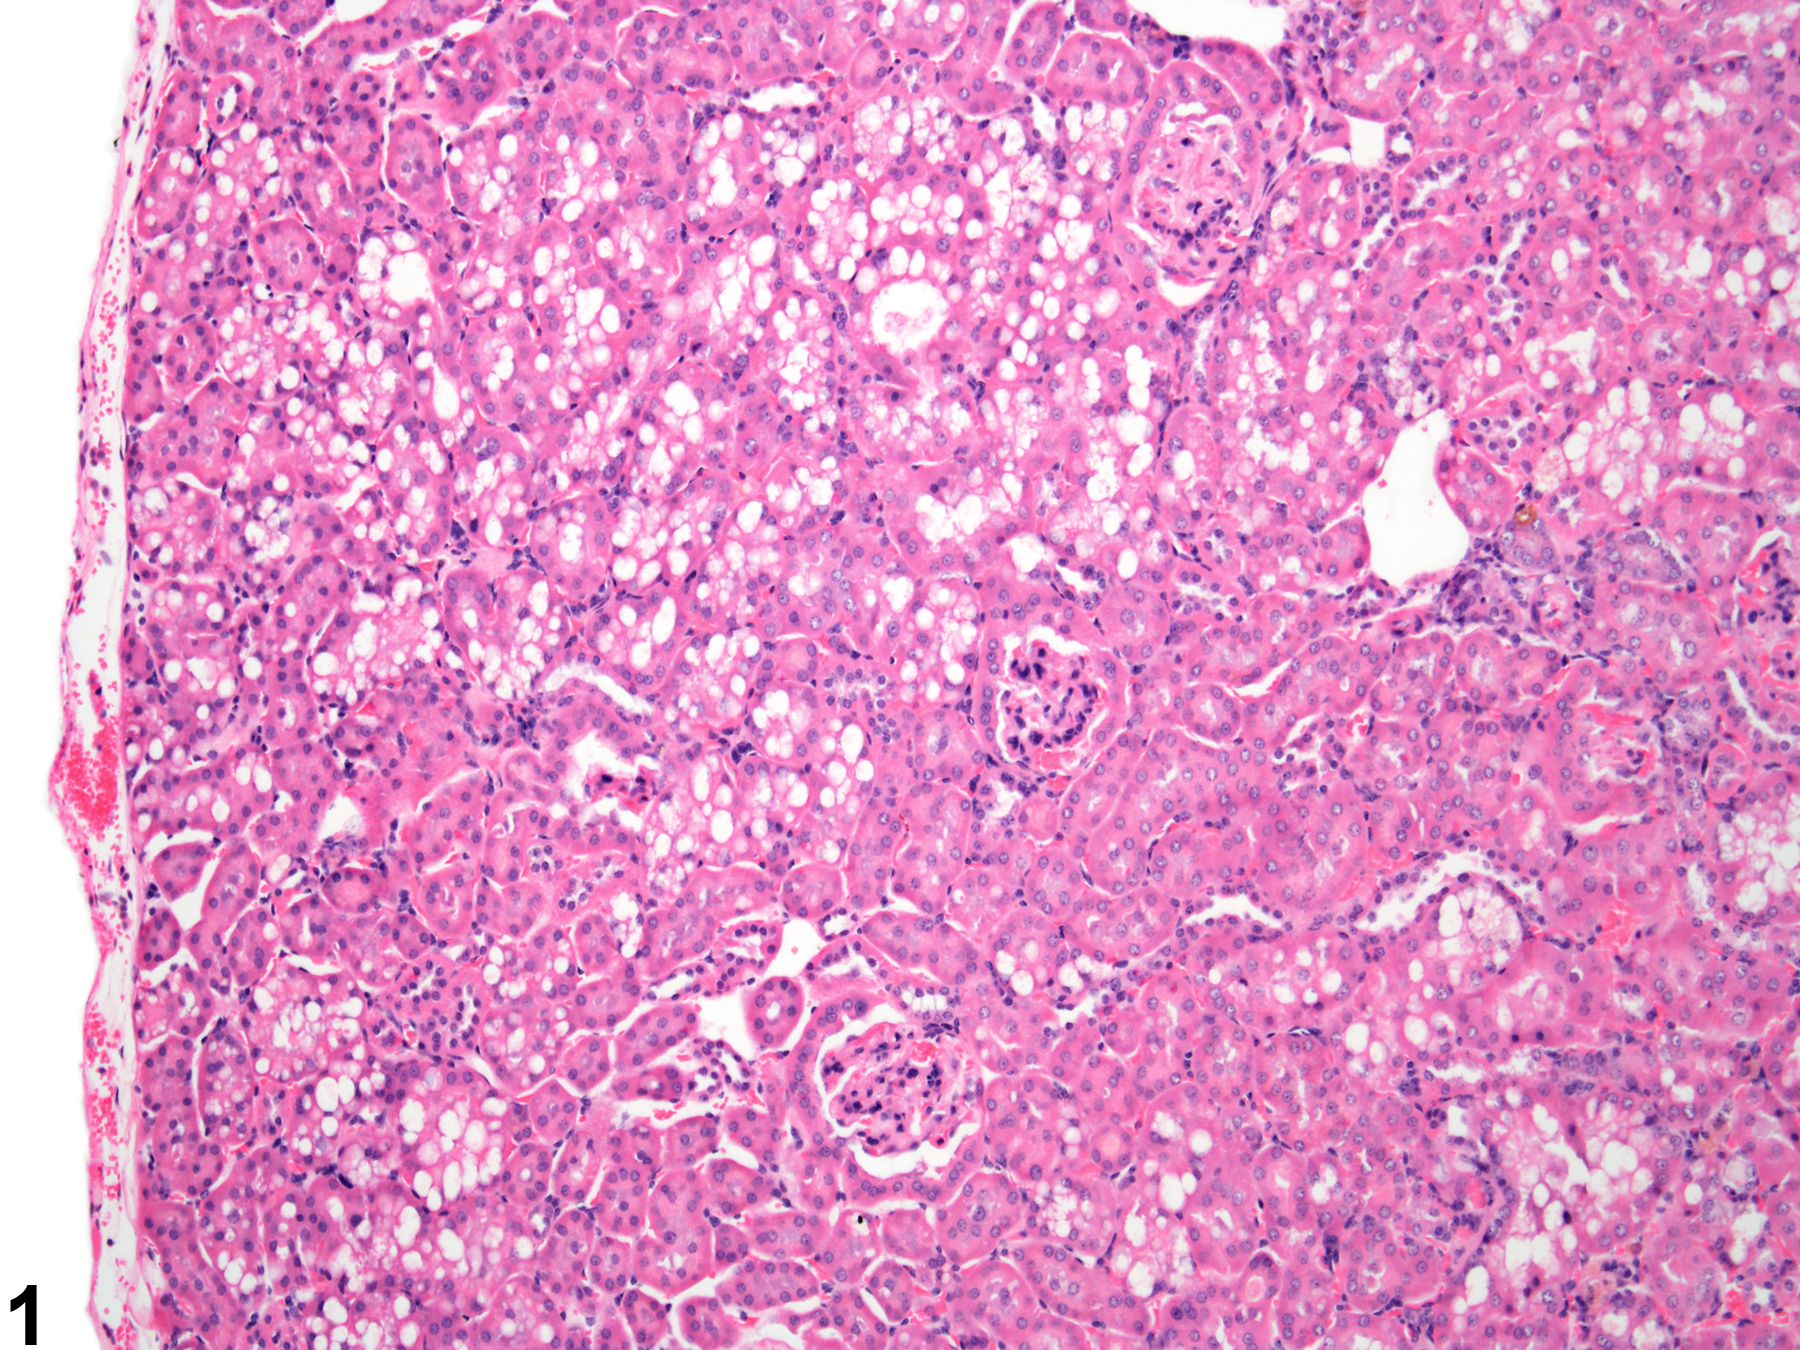 Image of renal tubule vauolation cytoplasmic in the kidney from a male B6C3F1 mouse in a chronic study